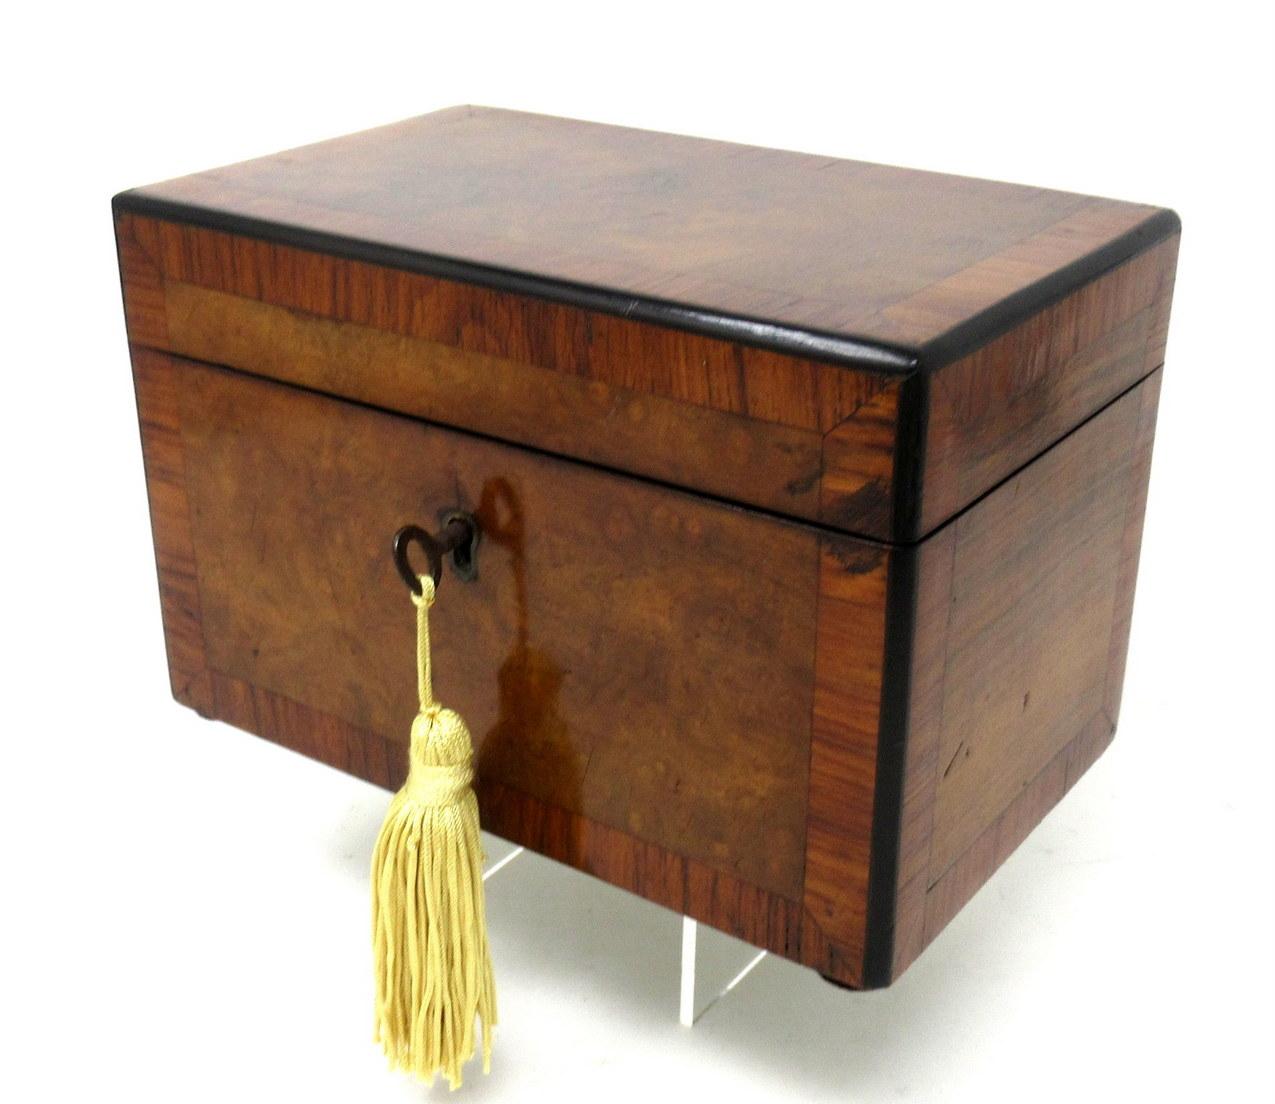 A superb example of an English Georgian period well figured burr walnut double interior section tea caddy of rectangular outline, compact proportions and outstanding quality, all areas are cross-banded in satinwood and edged with with quadrant